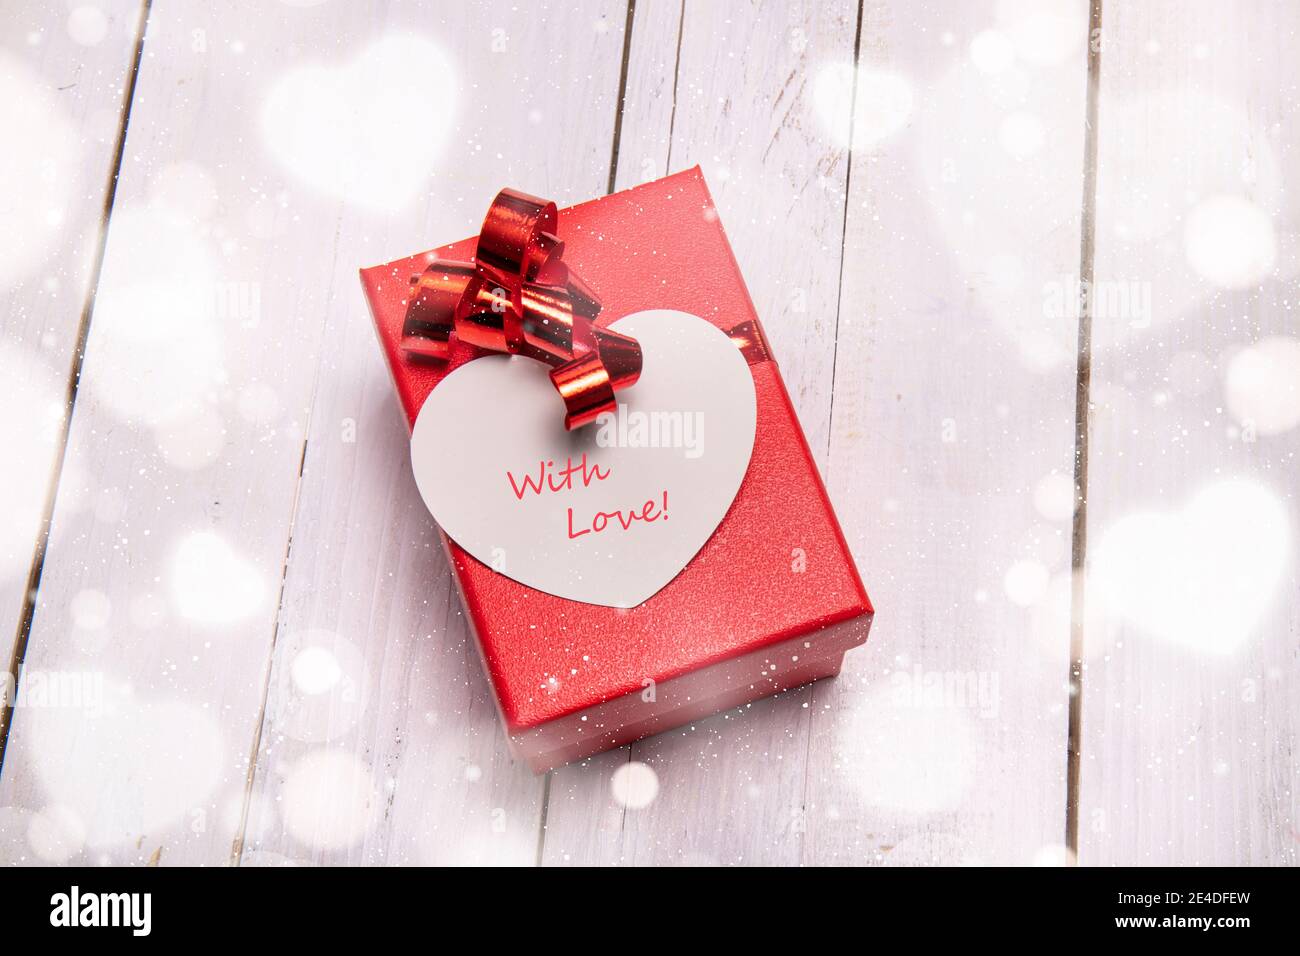 Red box with a big heart-shaped card for a special Valentine gift. White wooden background and bokeh effect all around. Stock Photo